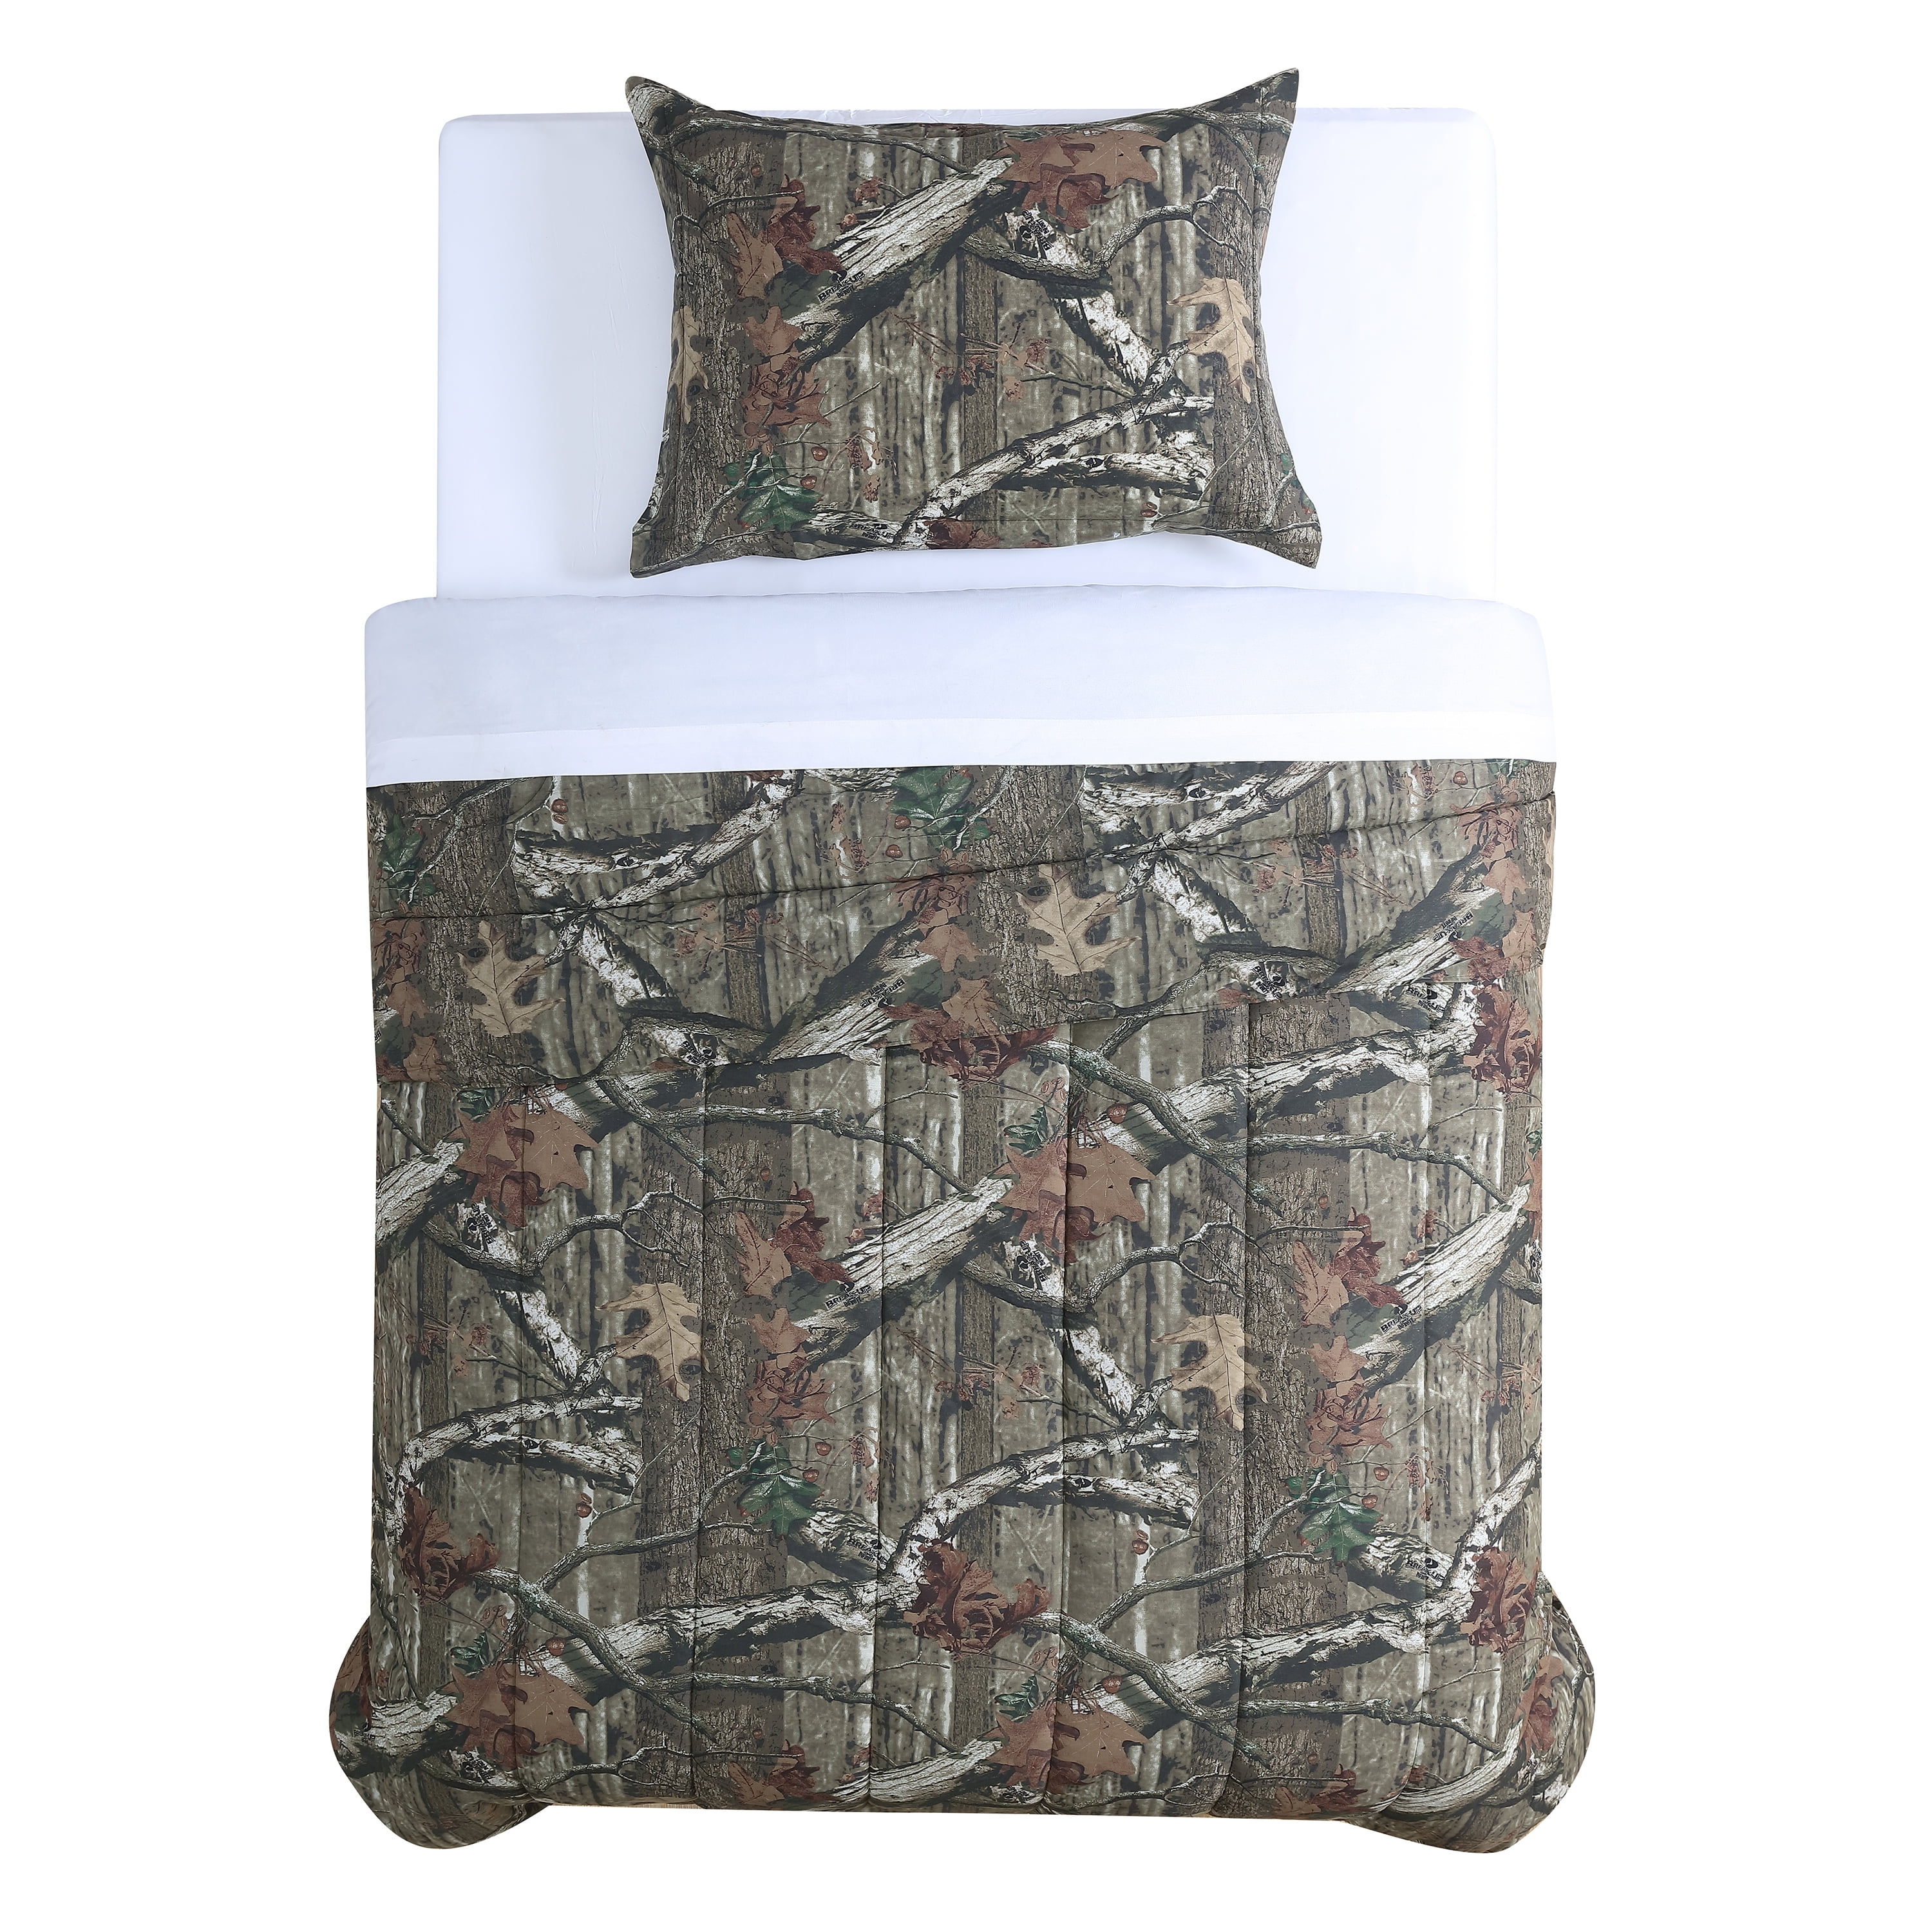 Details about   New Camouflage Twin Size Comforter Set Camo Bedding Outdoors Hunting Bedspread 